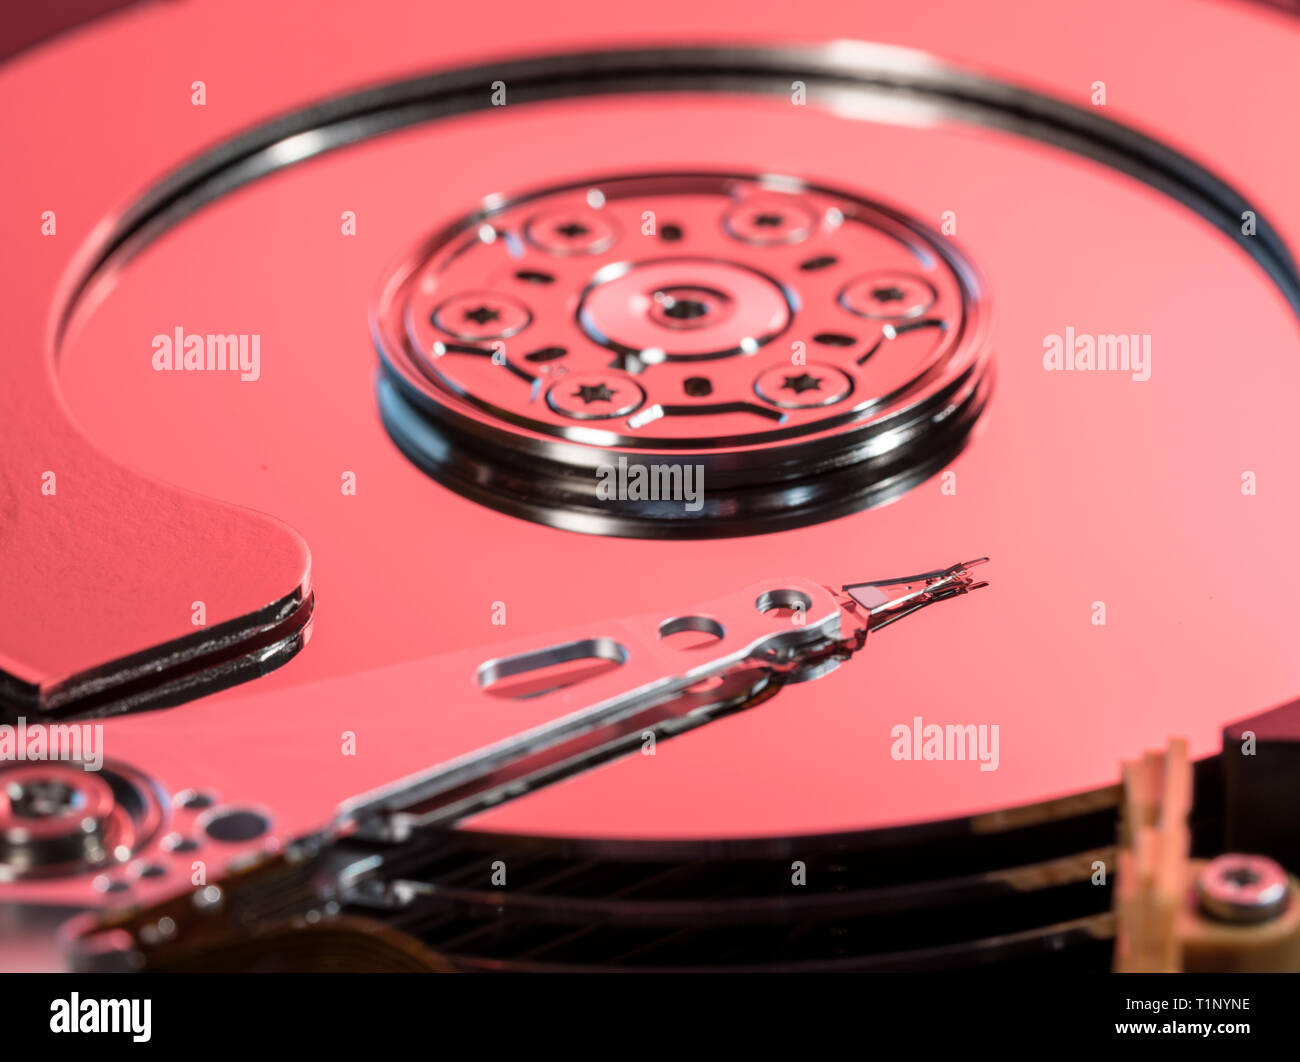 Concept illustration of artificial intelligence or data mining using hard drive Stock Photo